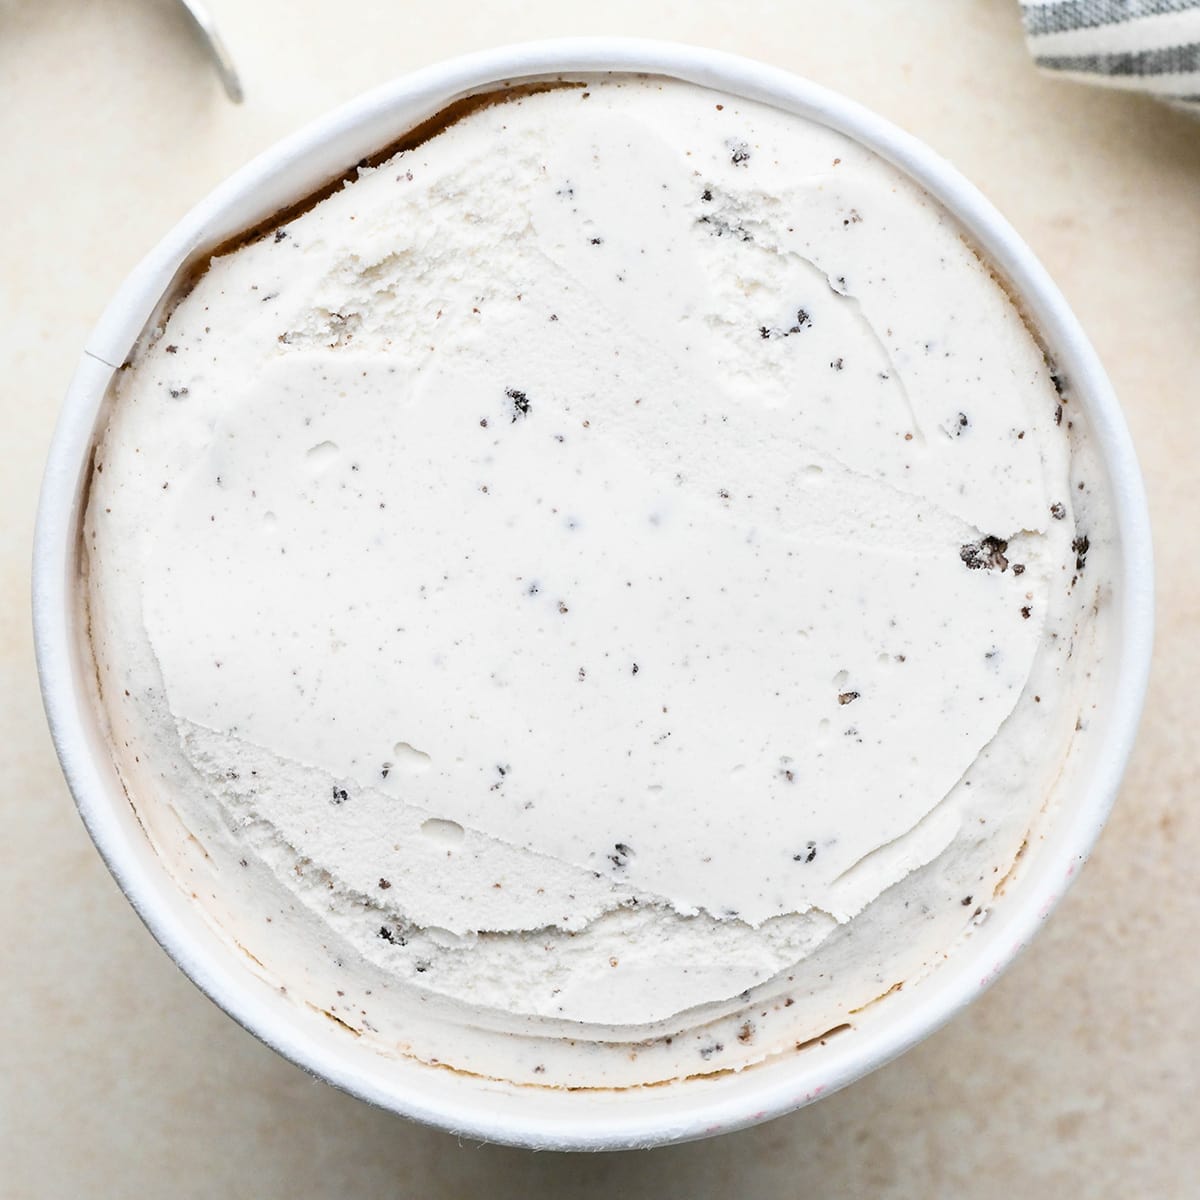 cookies and cream ice cream in a carton